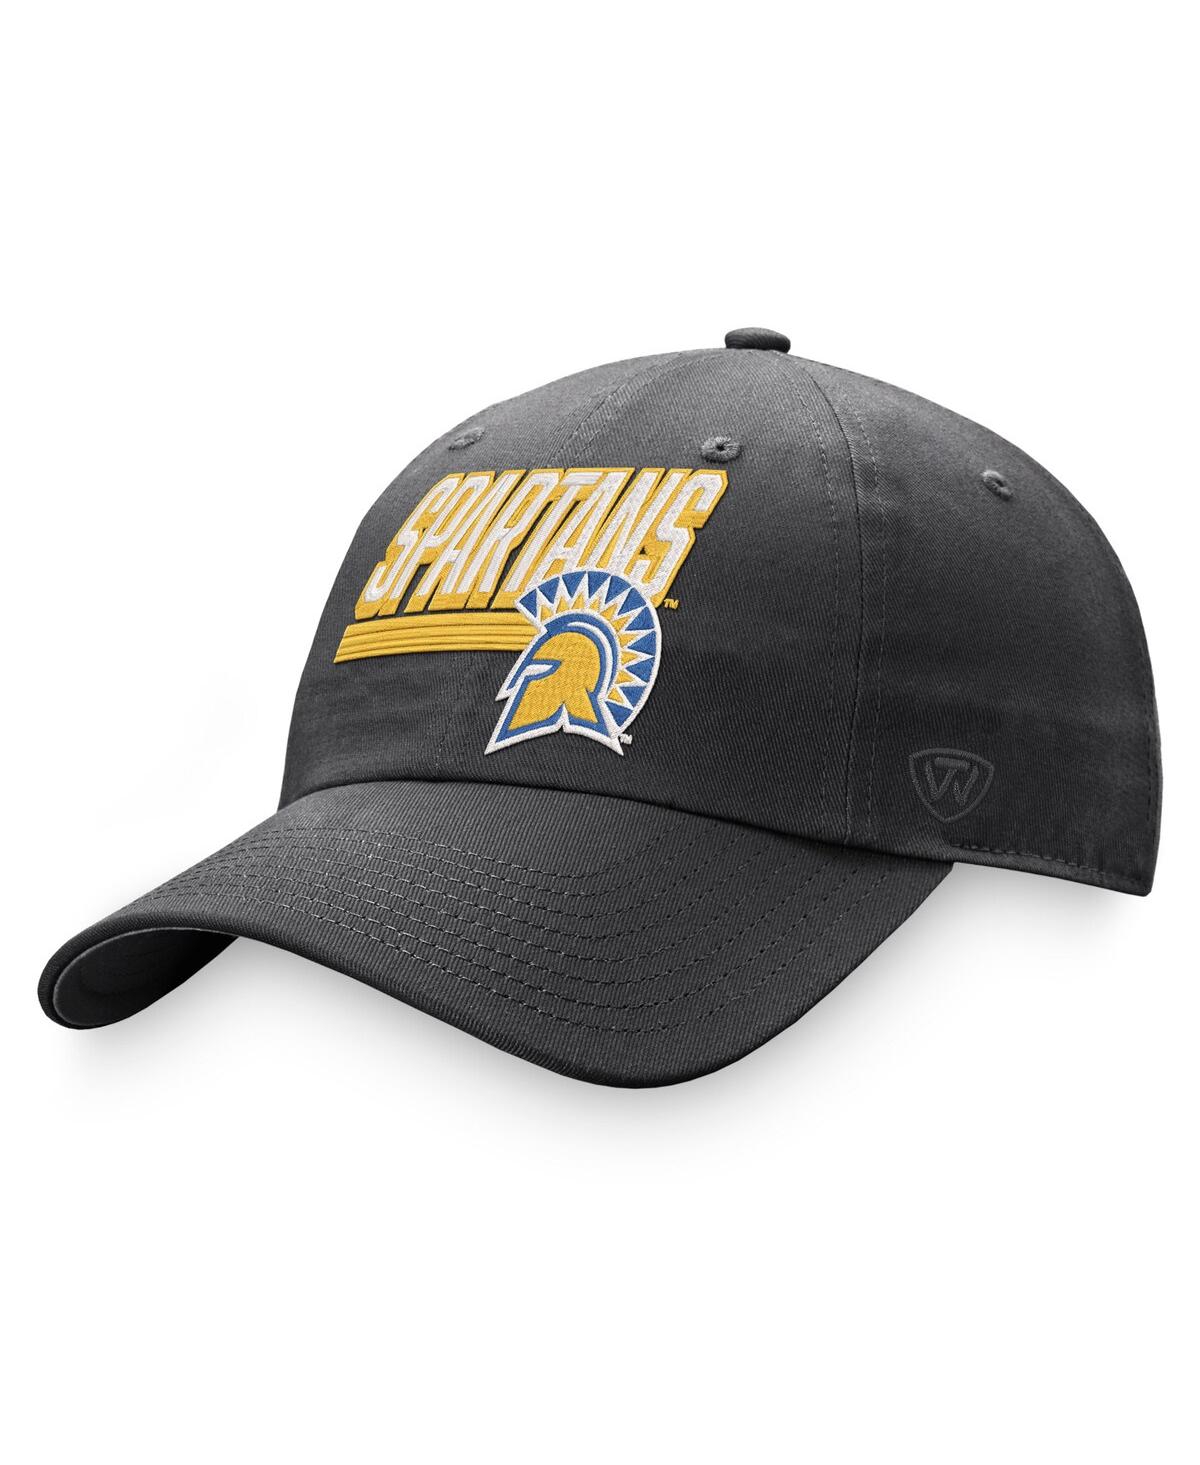 Men's Top of the World Charcoal San Jose State Spartans Slice Adjustable Hat - Charcoal